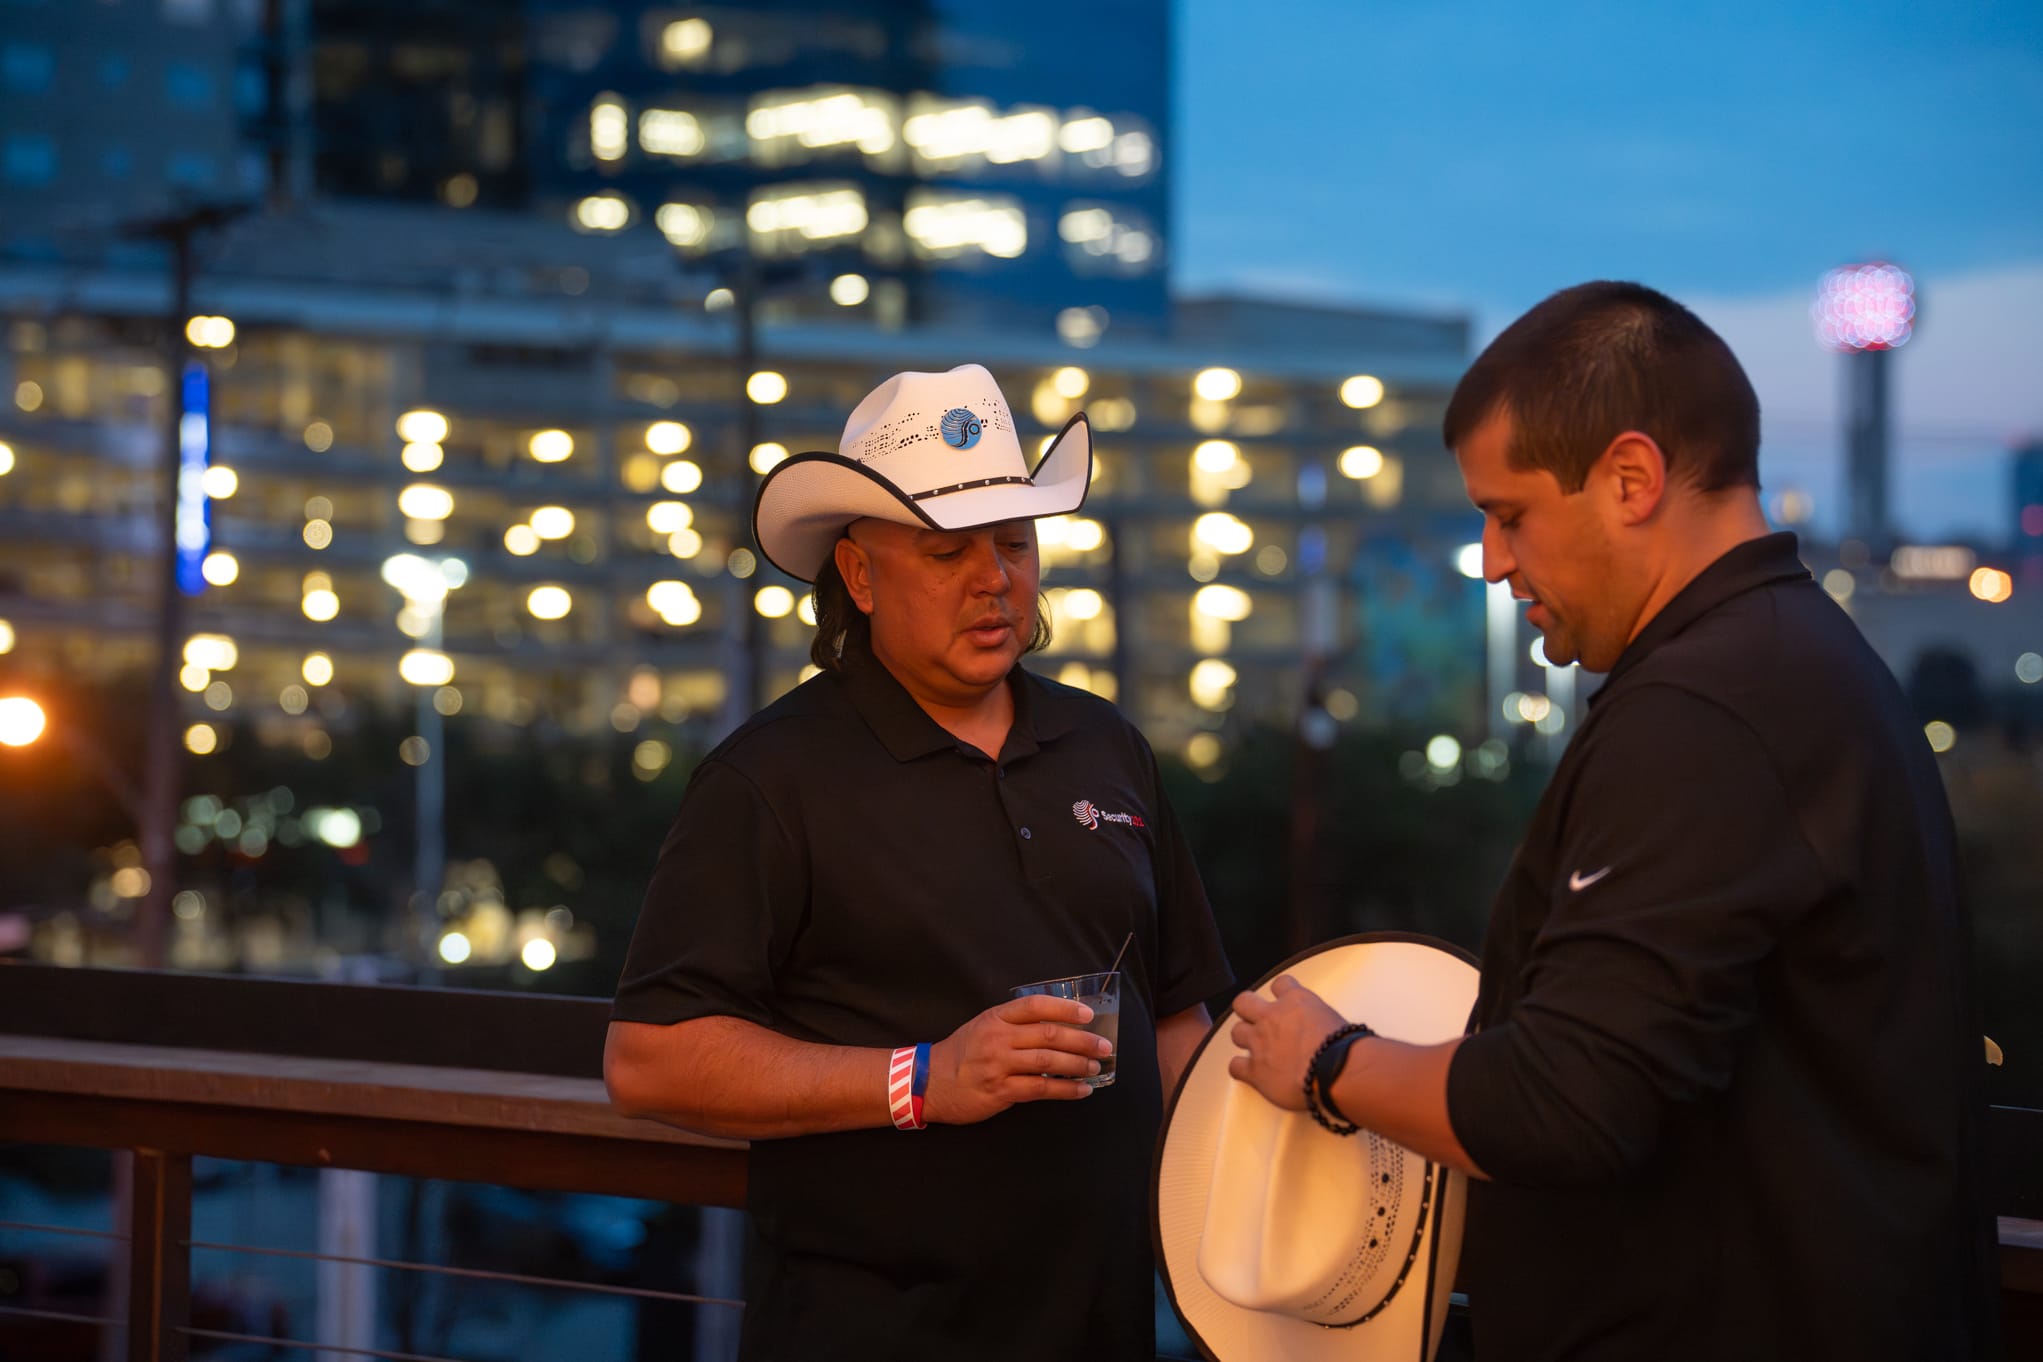 Security 101 Appreciation Event attendees network on the rooftop patio of Happiest Hour in Dallas, TX